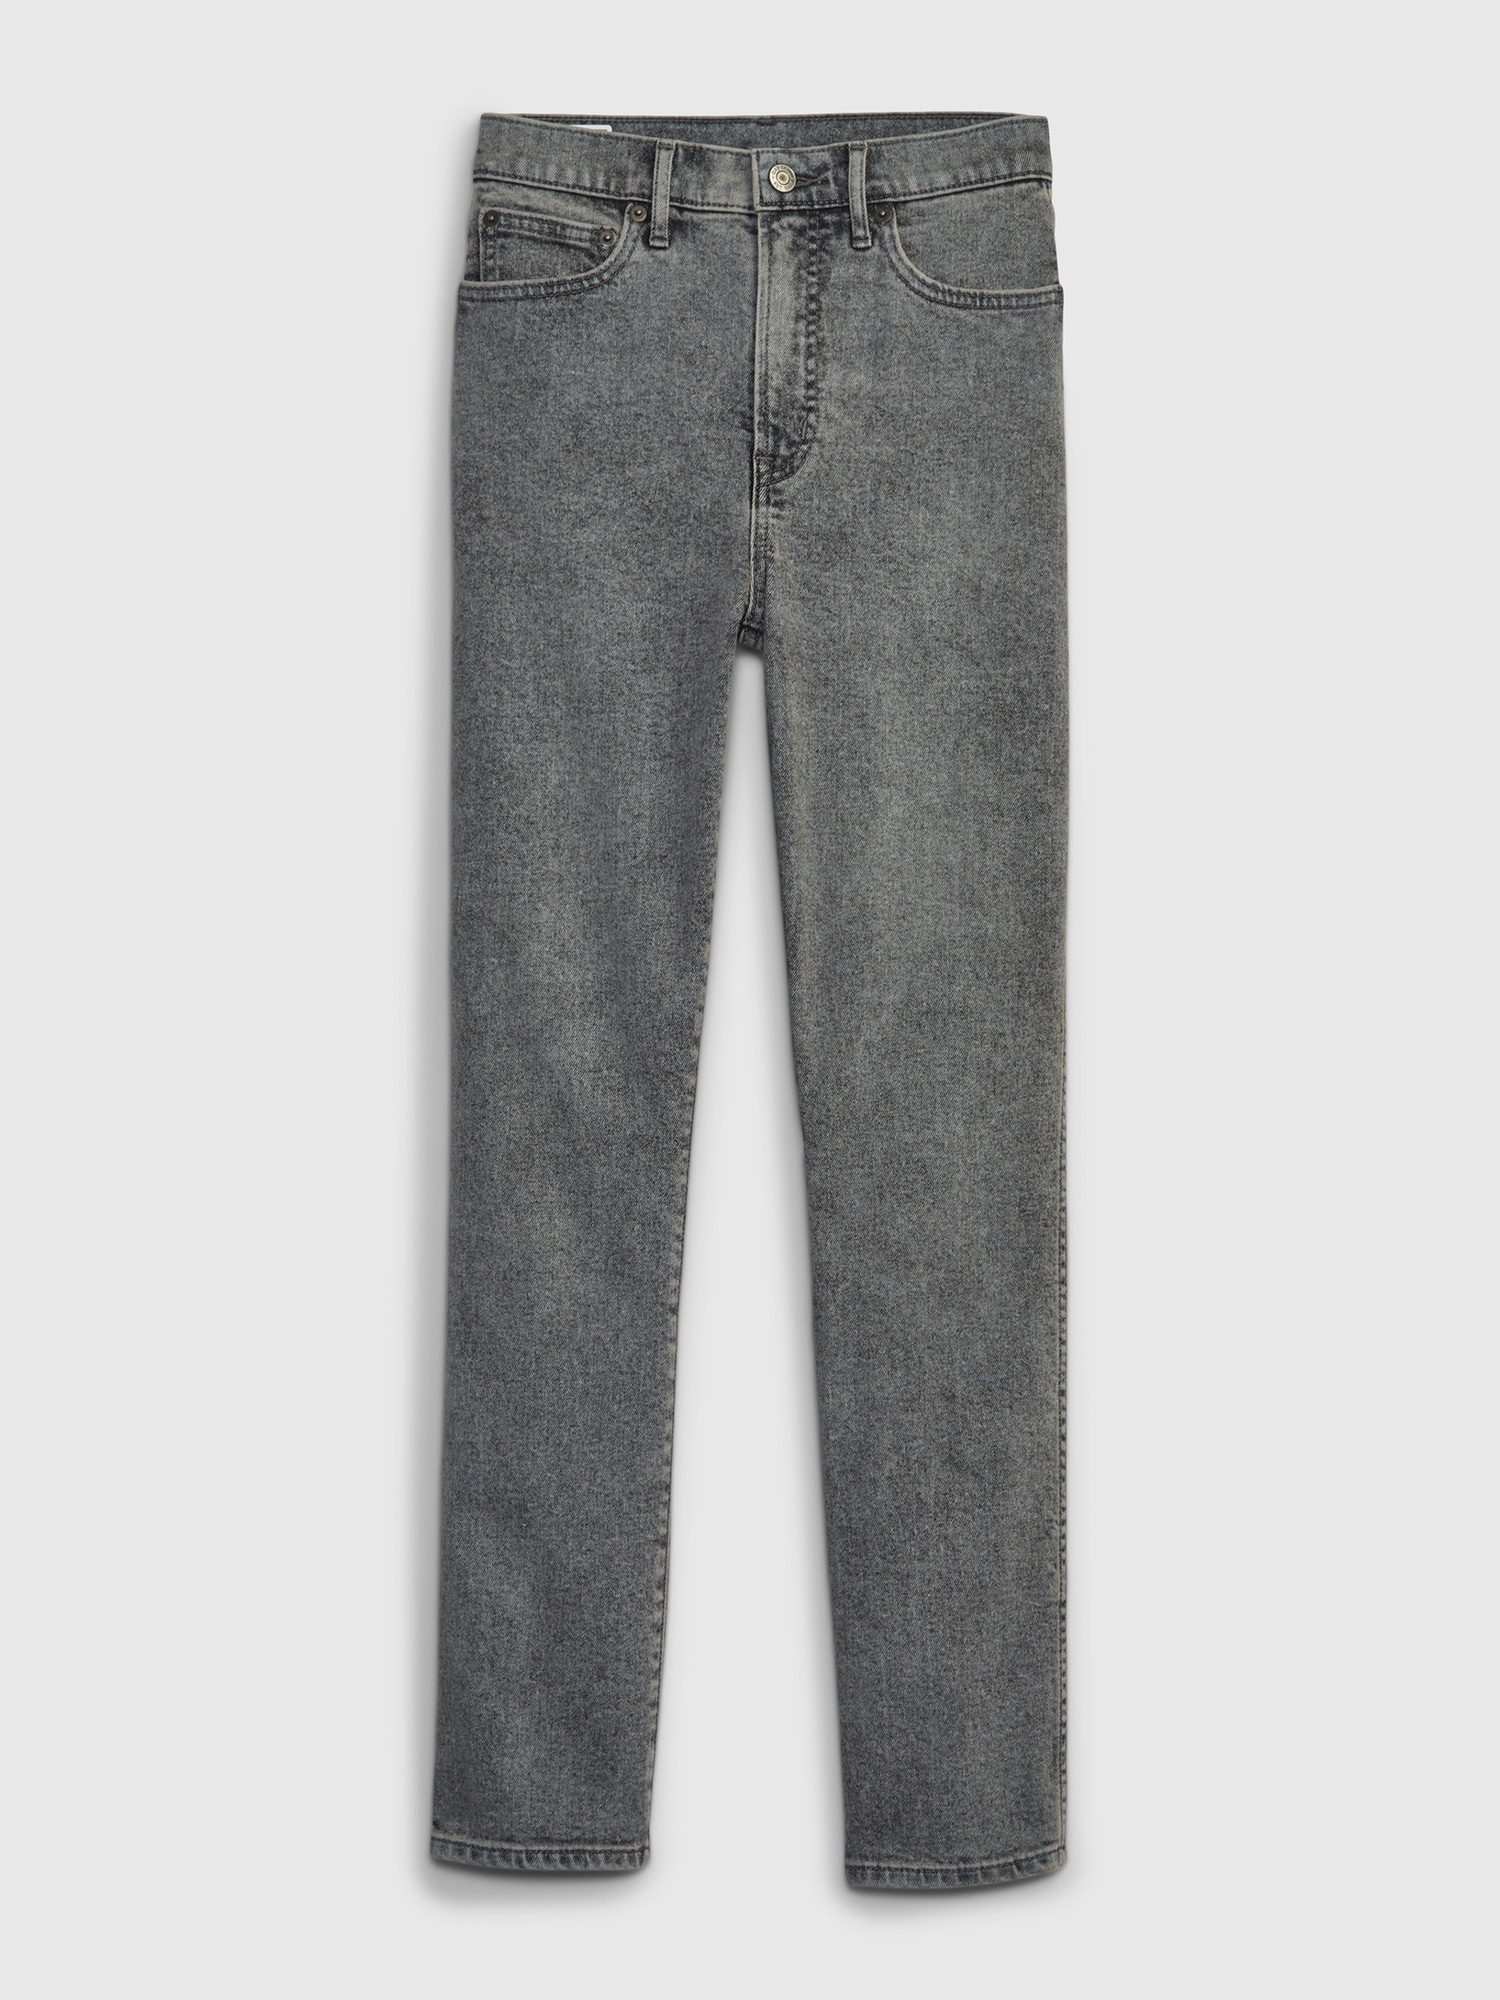 Buy Gap High Waisted Vintage Slim Fit Washwell Jeans from the Gap online  shop